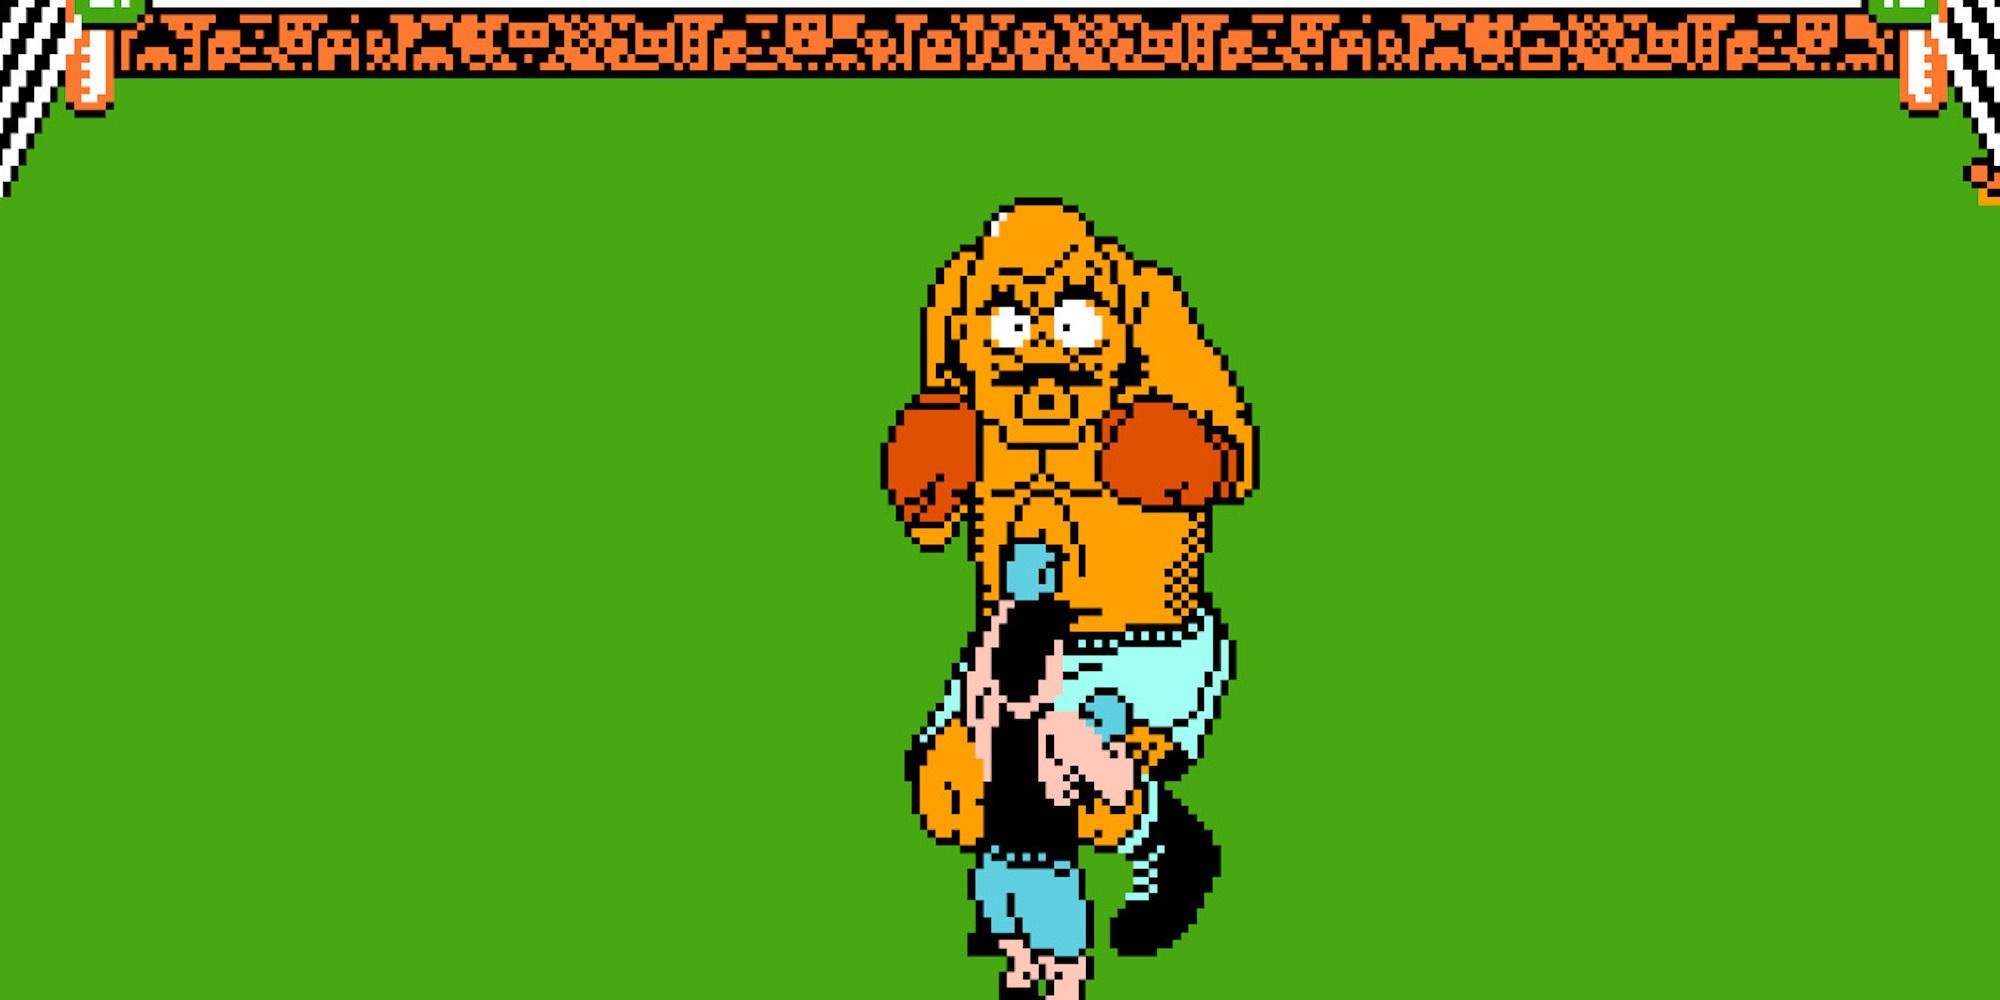 Fighting Bald Bull in Punch-Out